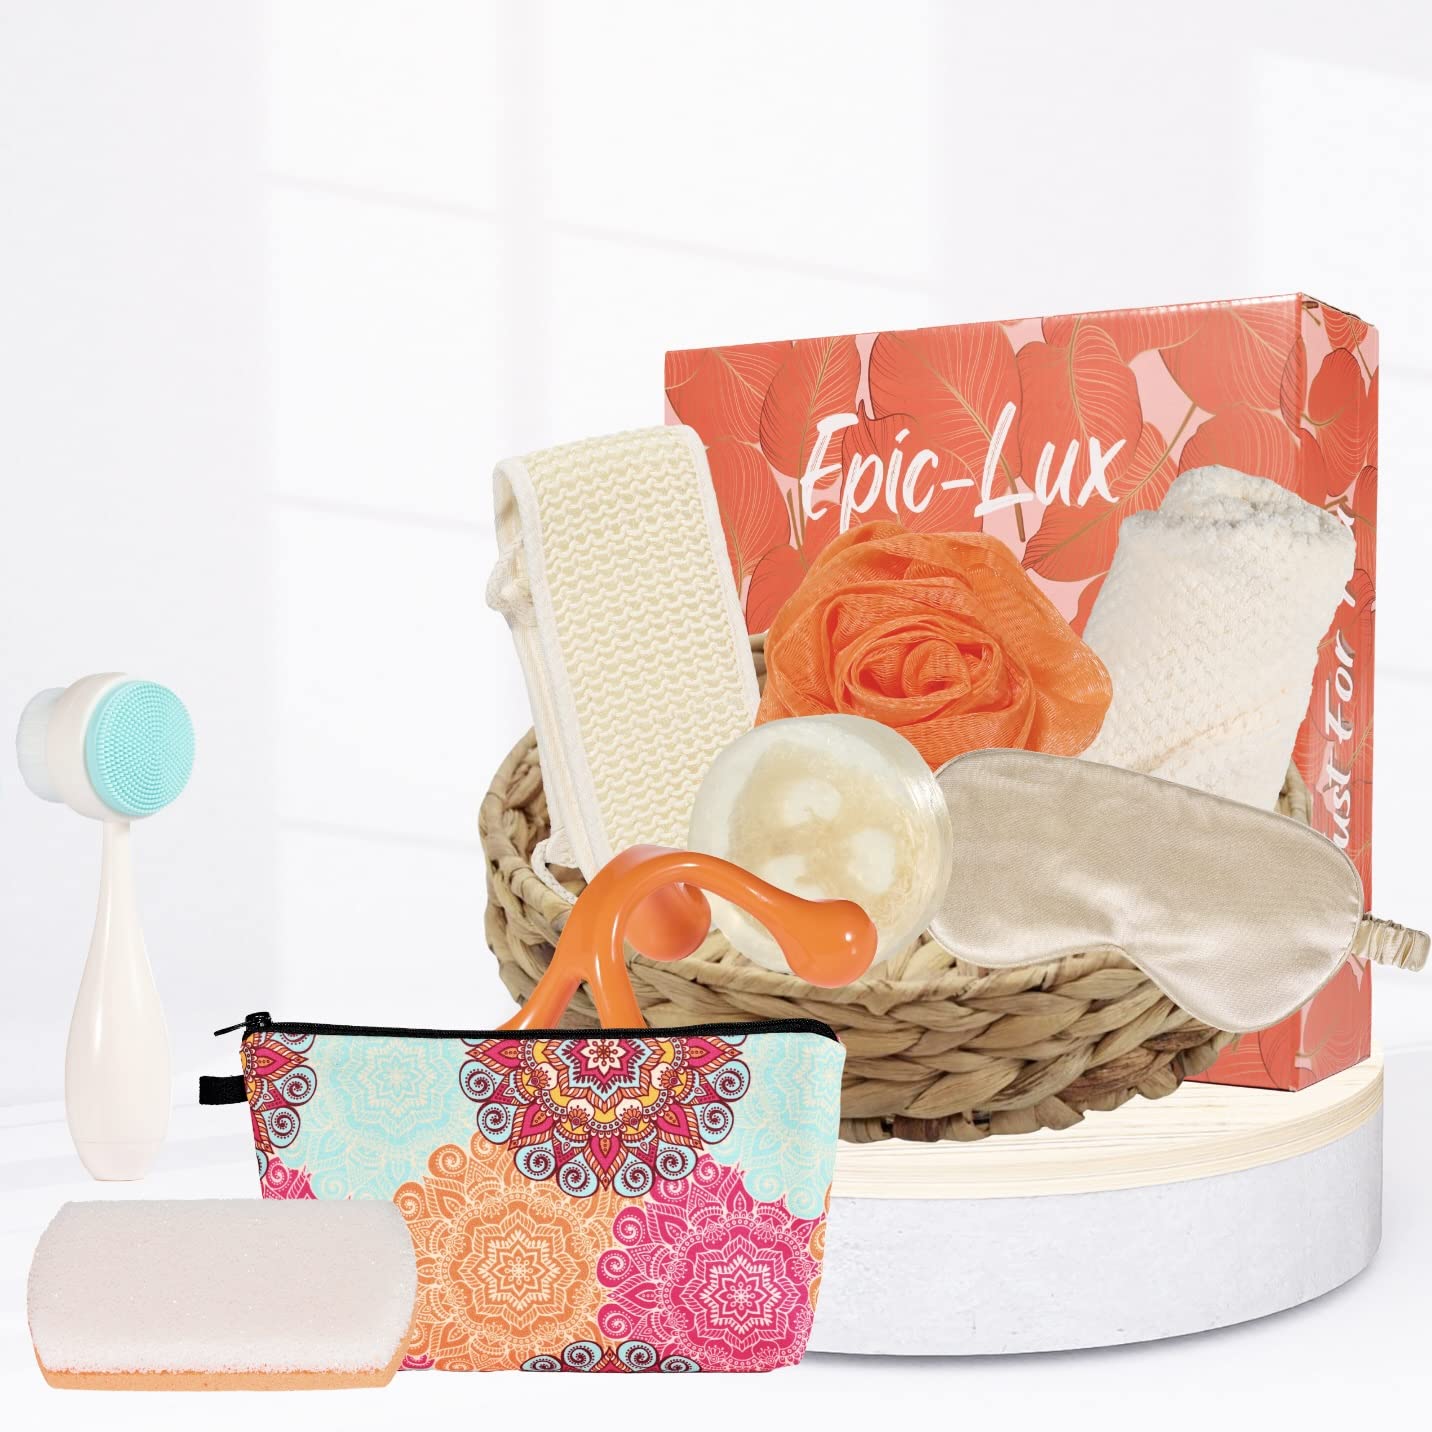  Birthday Gifts for Women - Make Her Feel Special with Relaxing  Spa Gift Baskets Set - Unique Birthday Bath Box for Mom Sister and Best  Friend - Happy Bday Basket